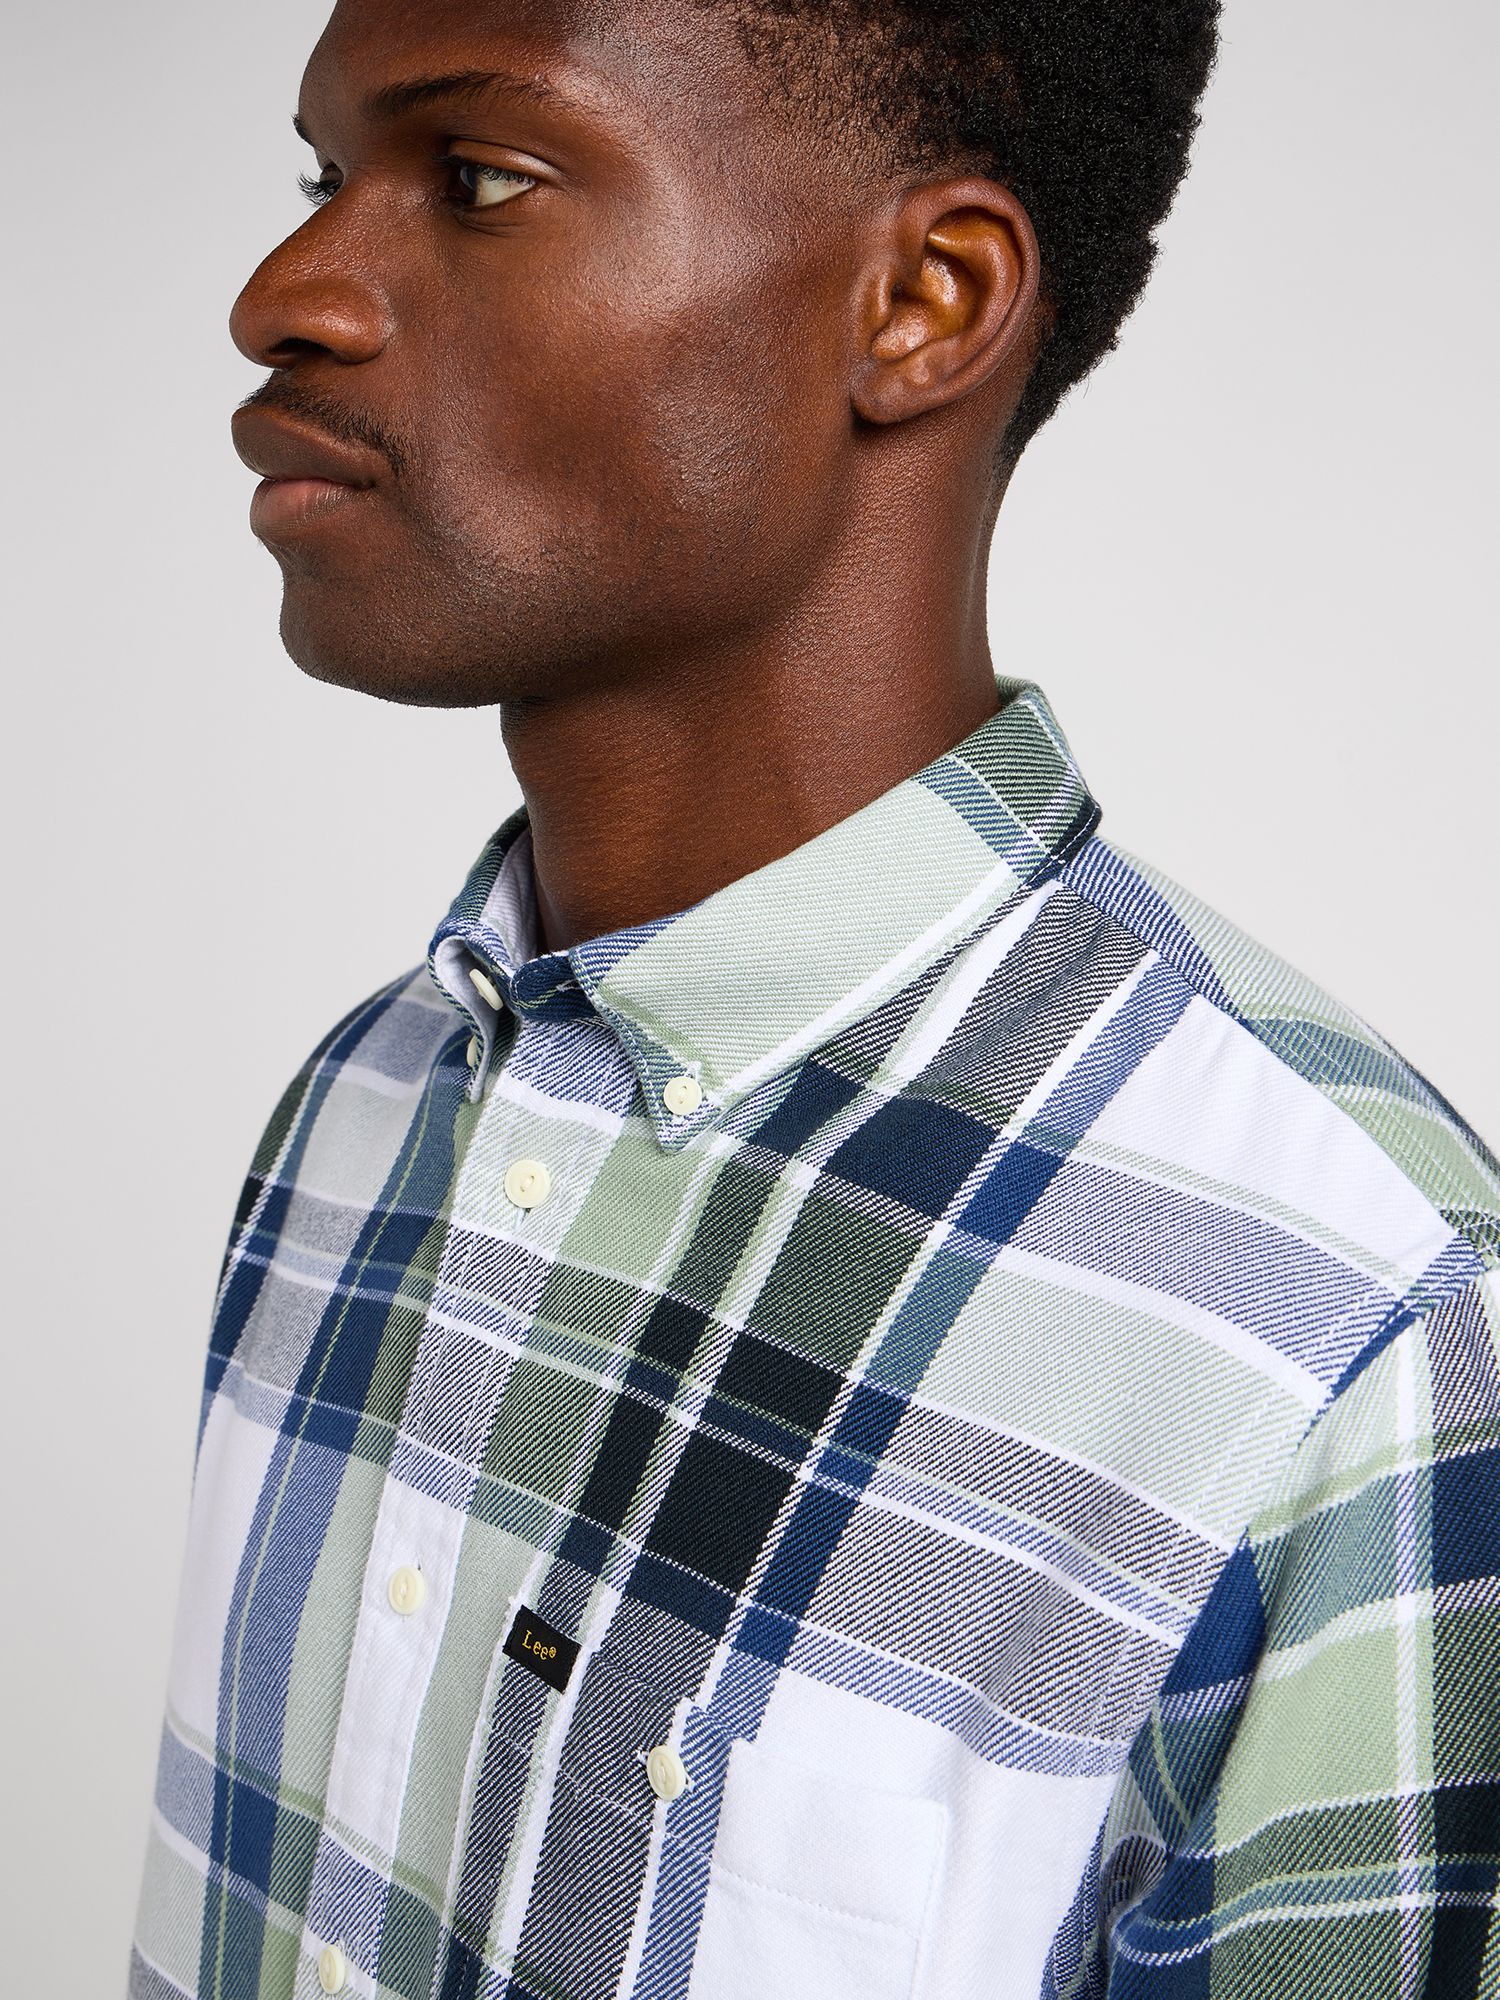 Lee Riveted Check Shirt, Intuition Grey, S